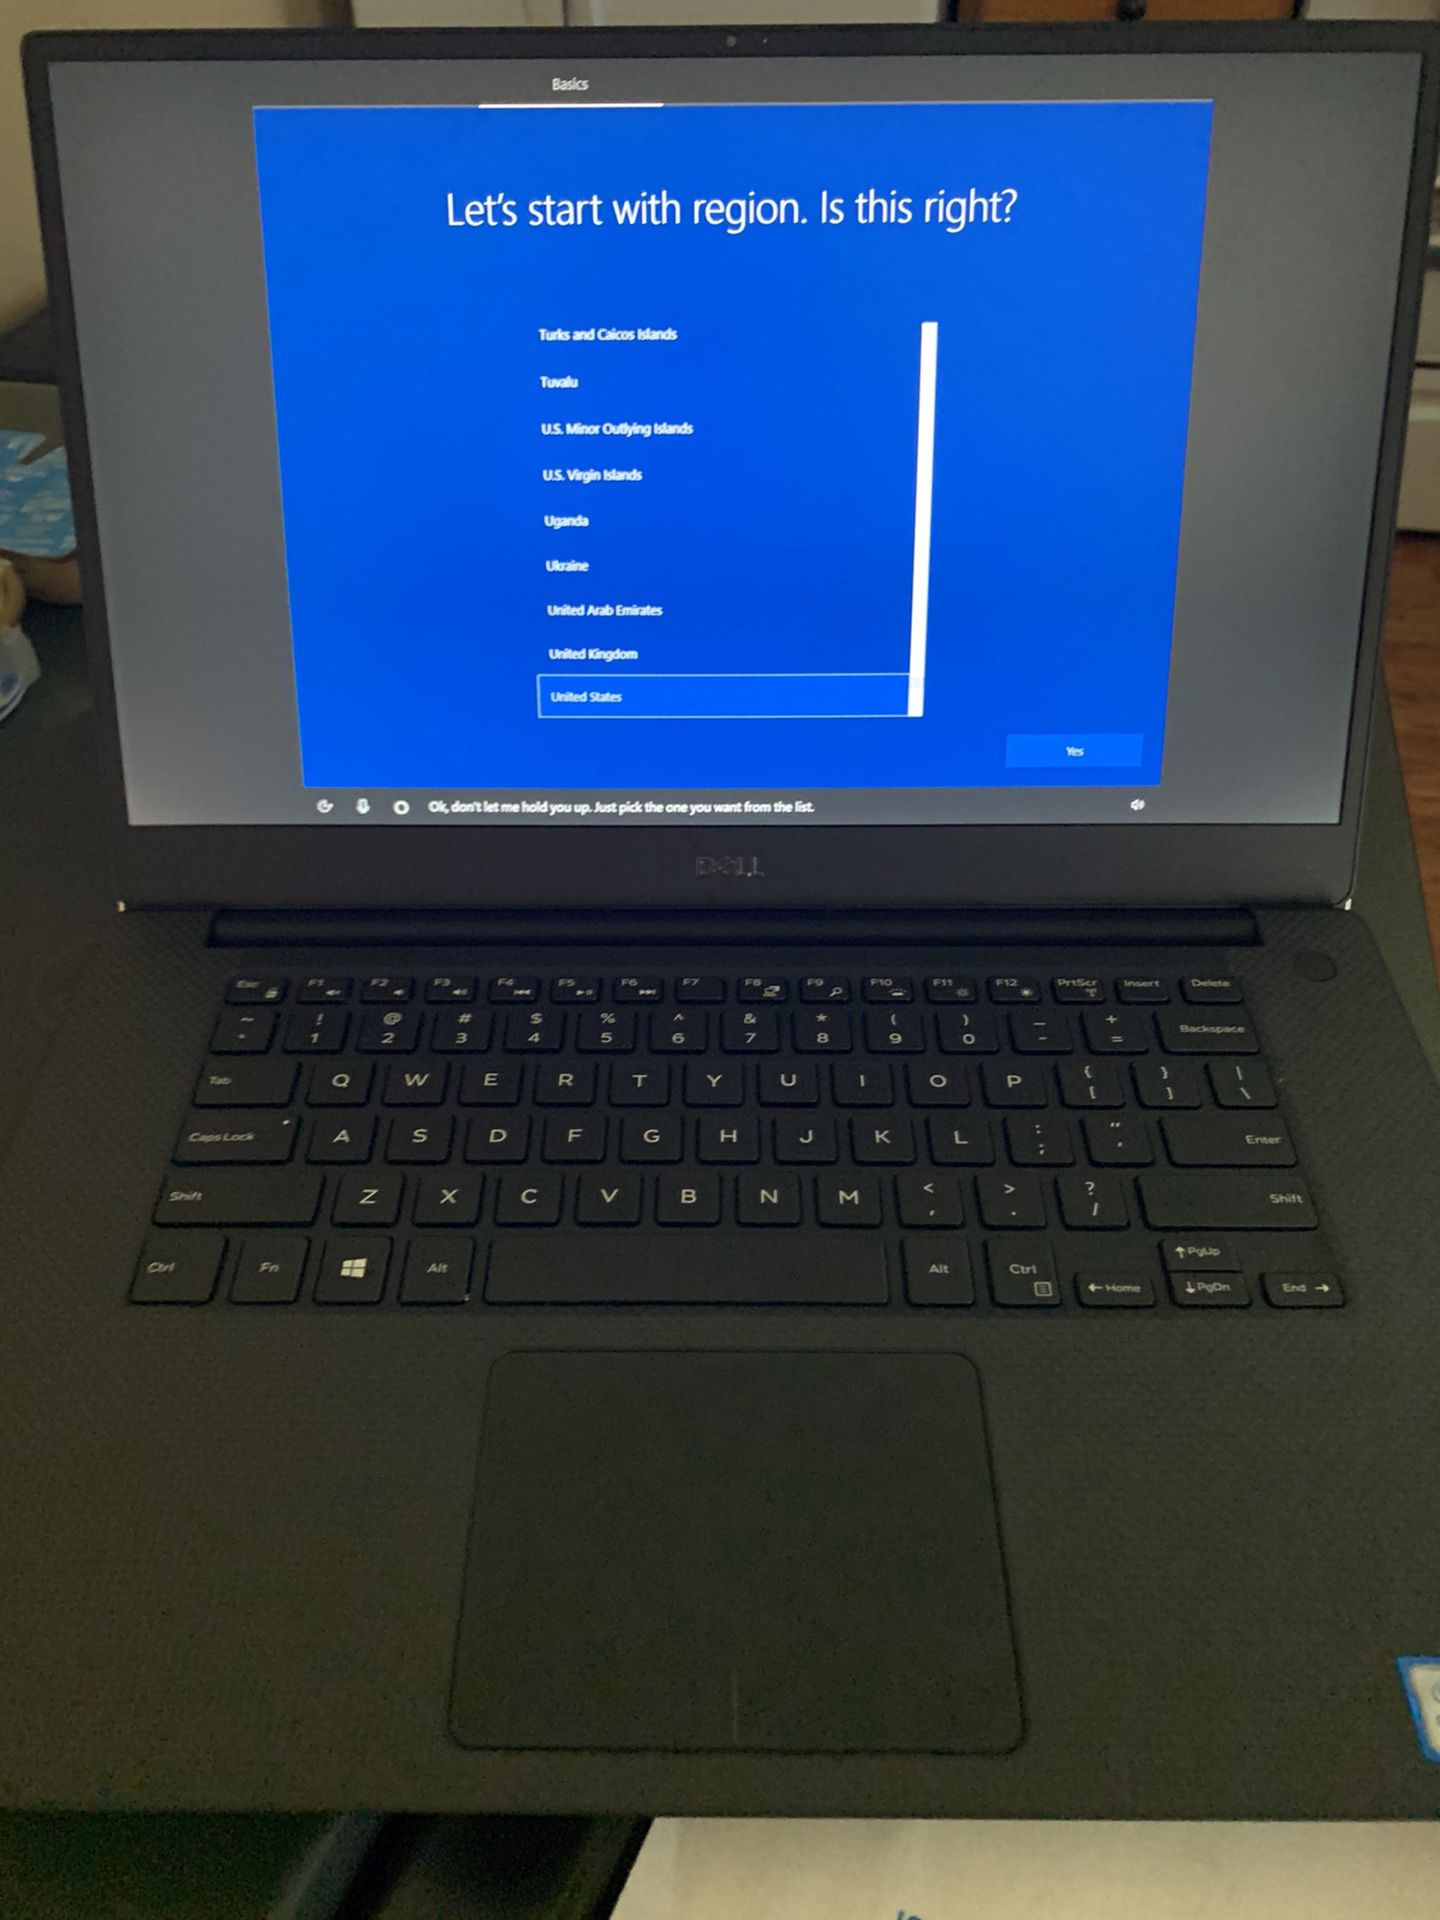 DELL XPS 15 7590